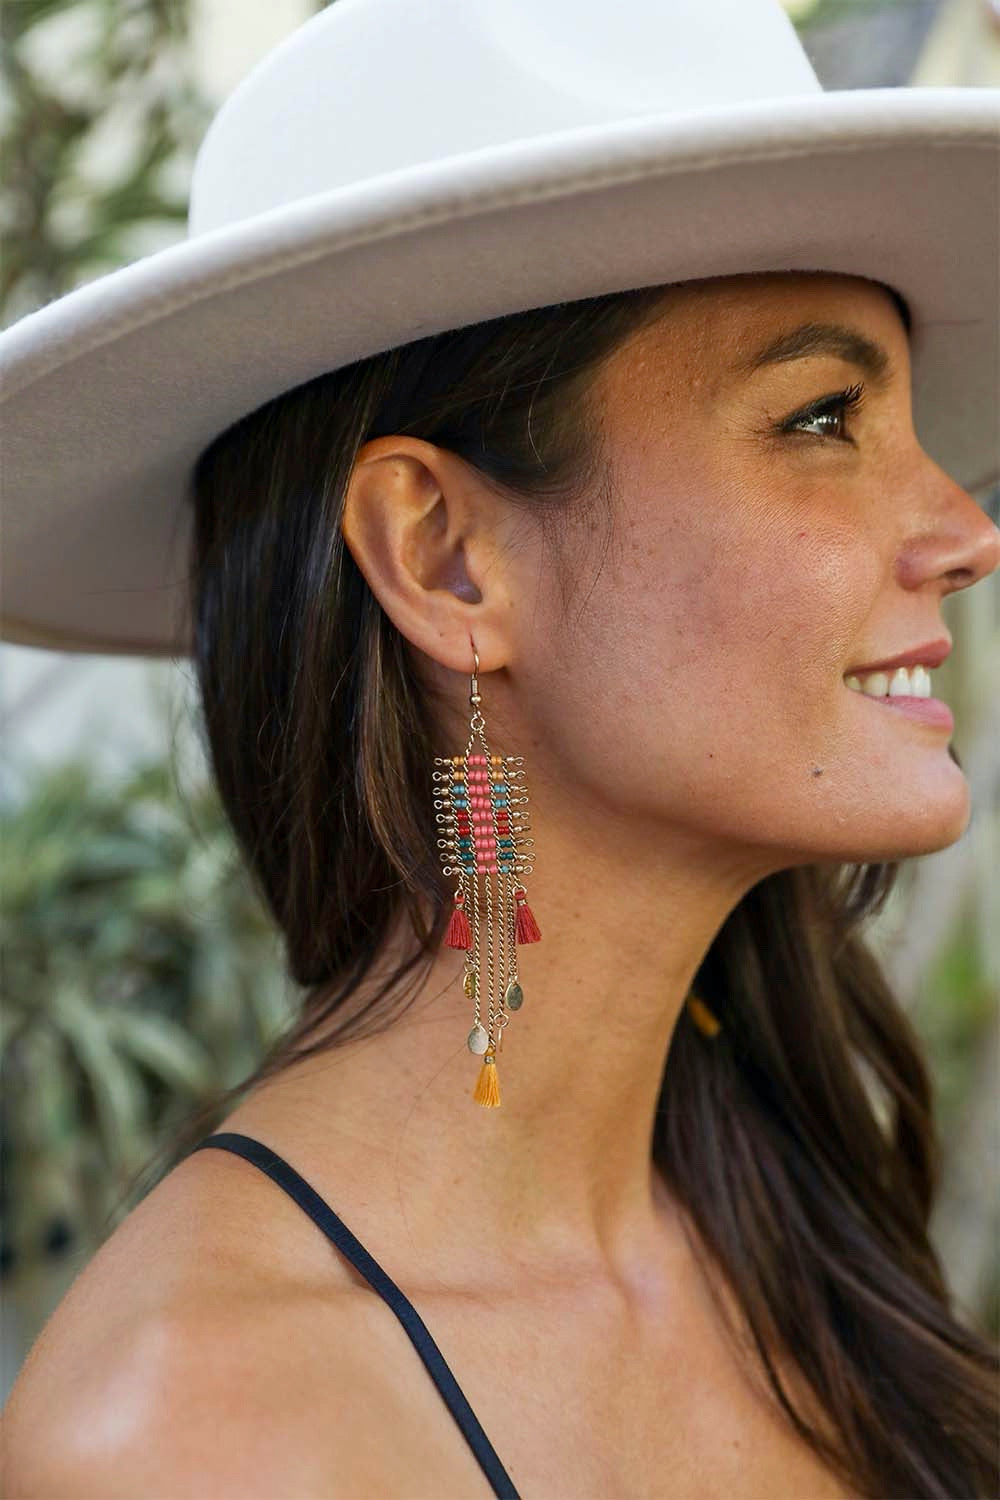 Fringe Seed Bead Earring - Roses & Chains | Fashionable Clothing, Shoes, Accessories, & More